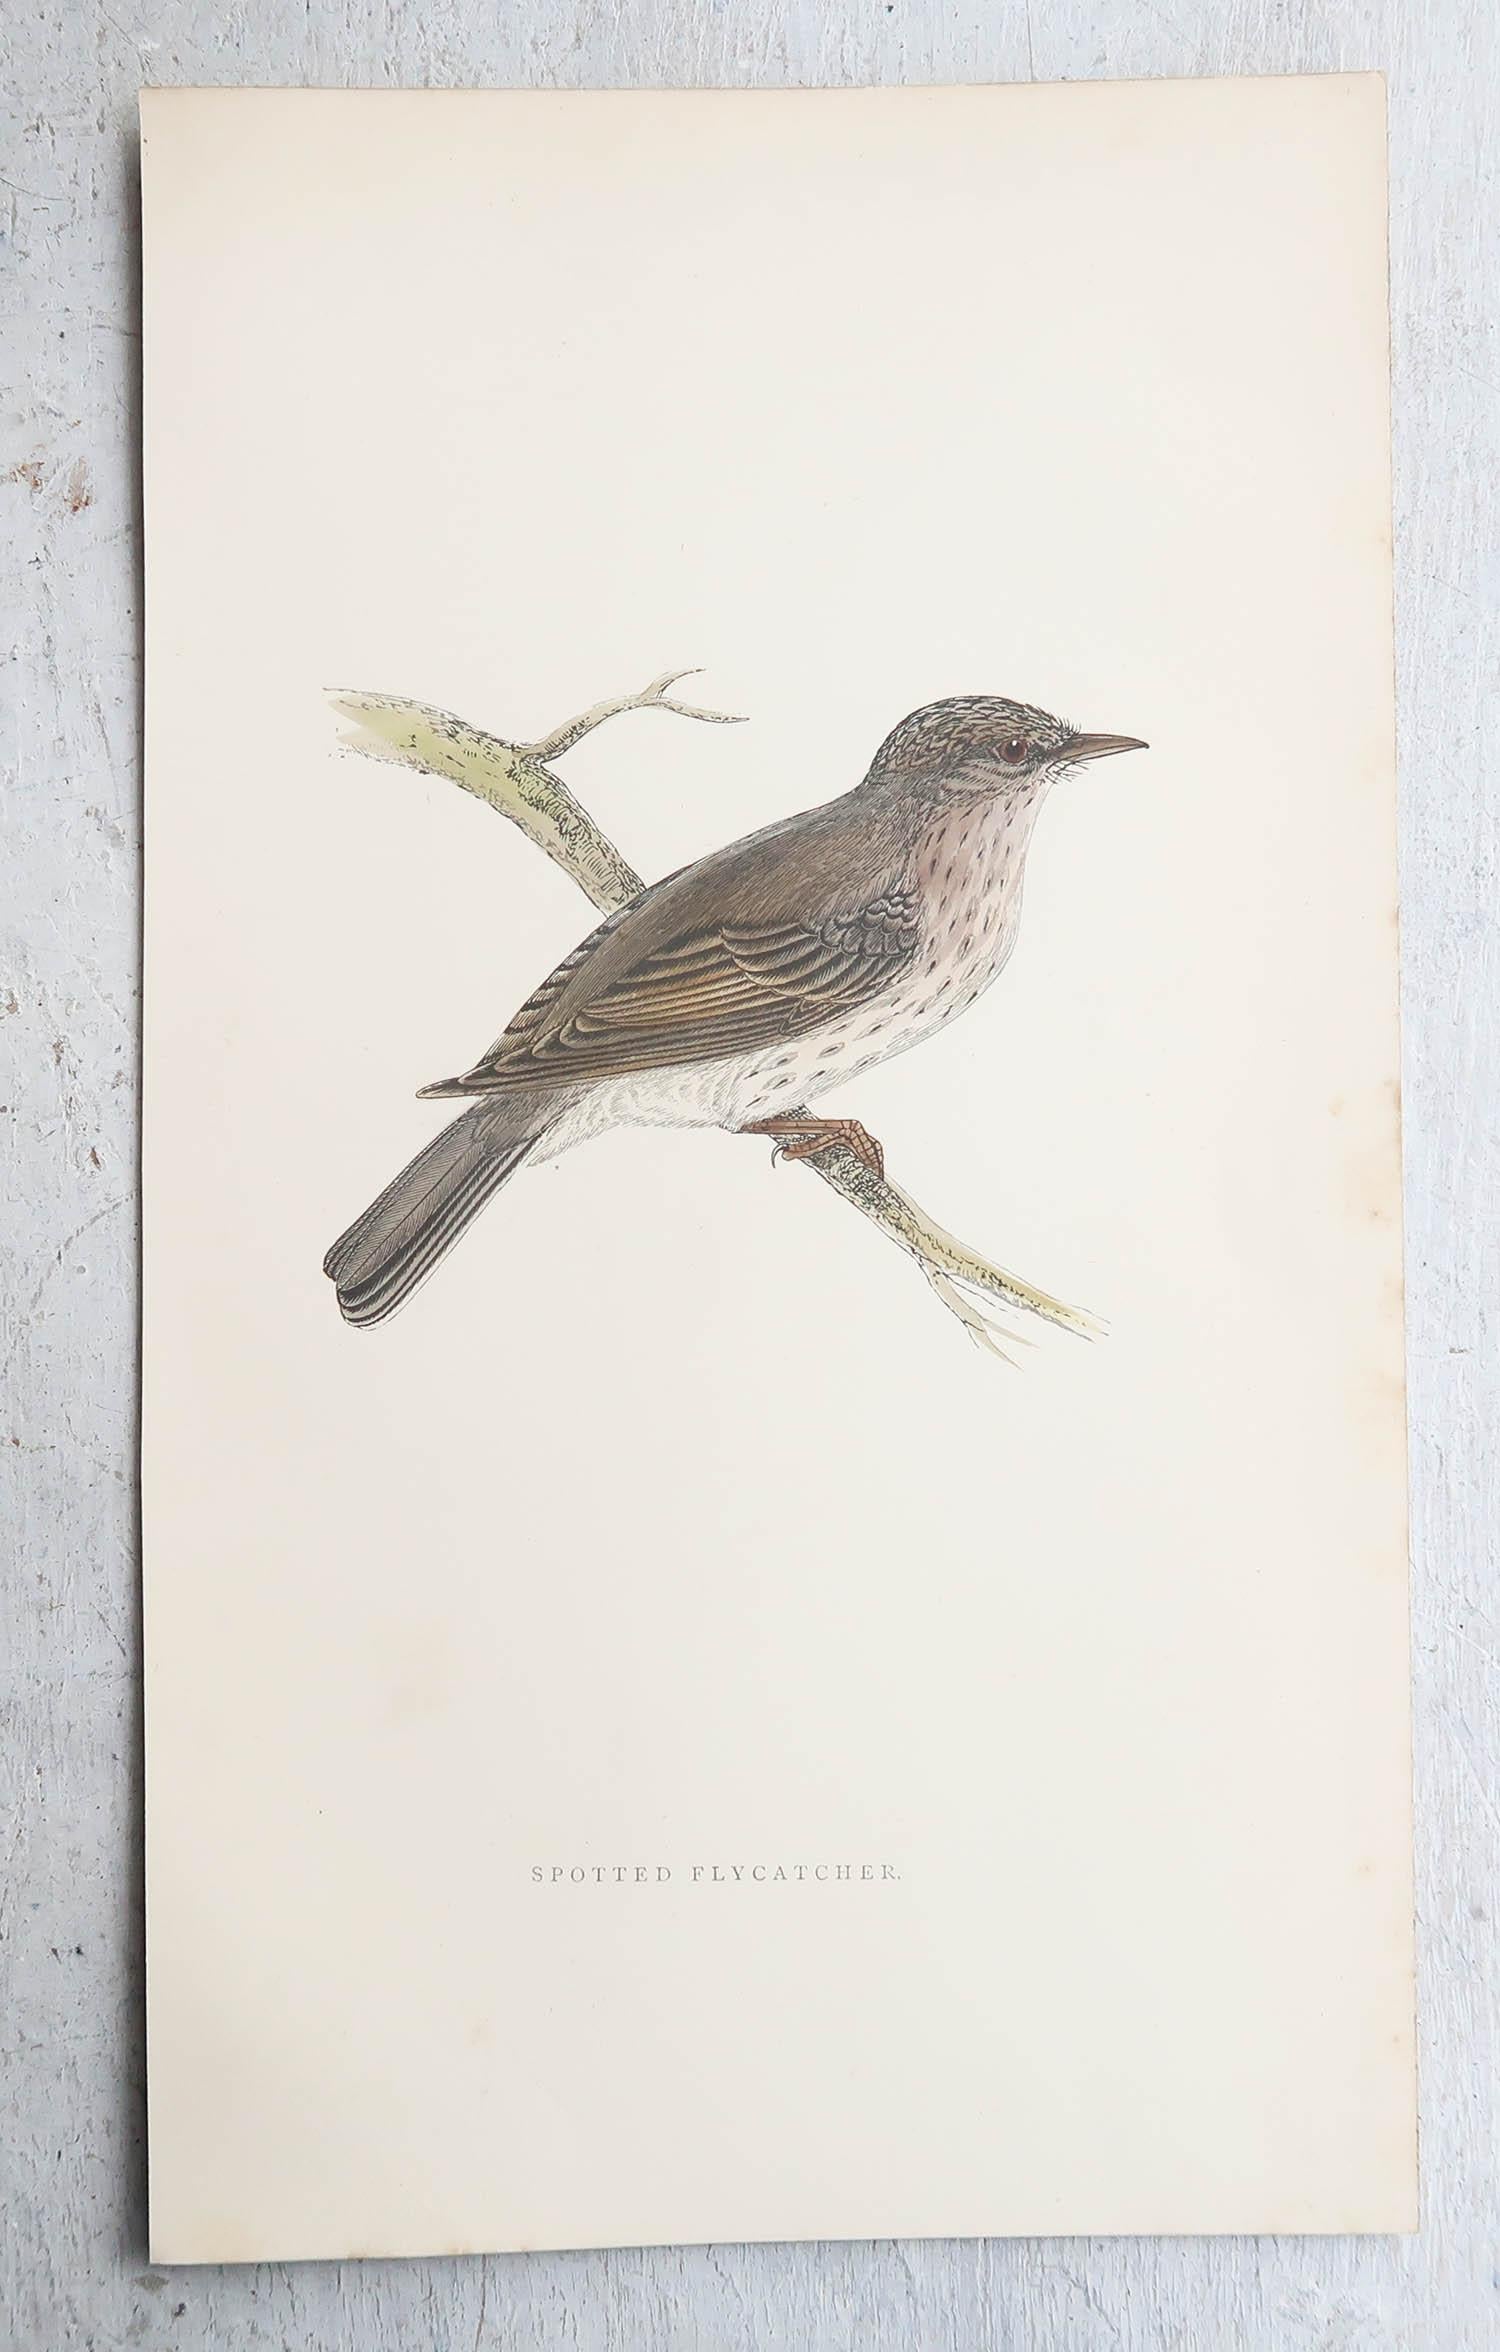 English Original Antique Print of a Spotted Flycatcher, circa 1880, 'Unframed' For Sale